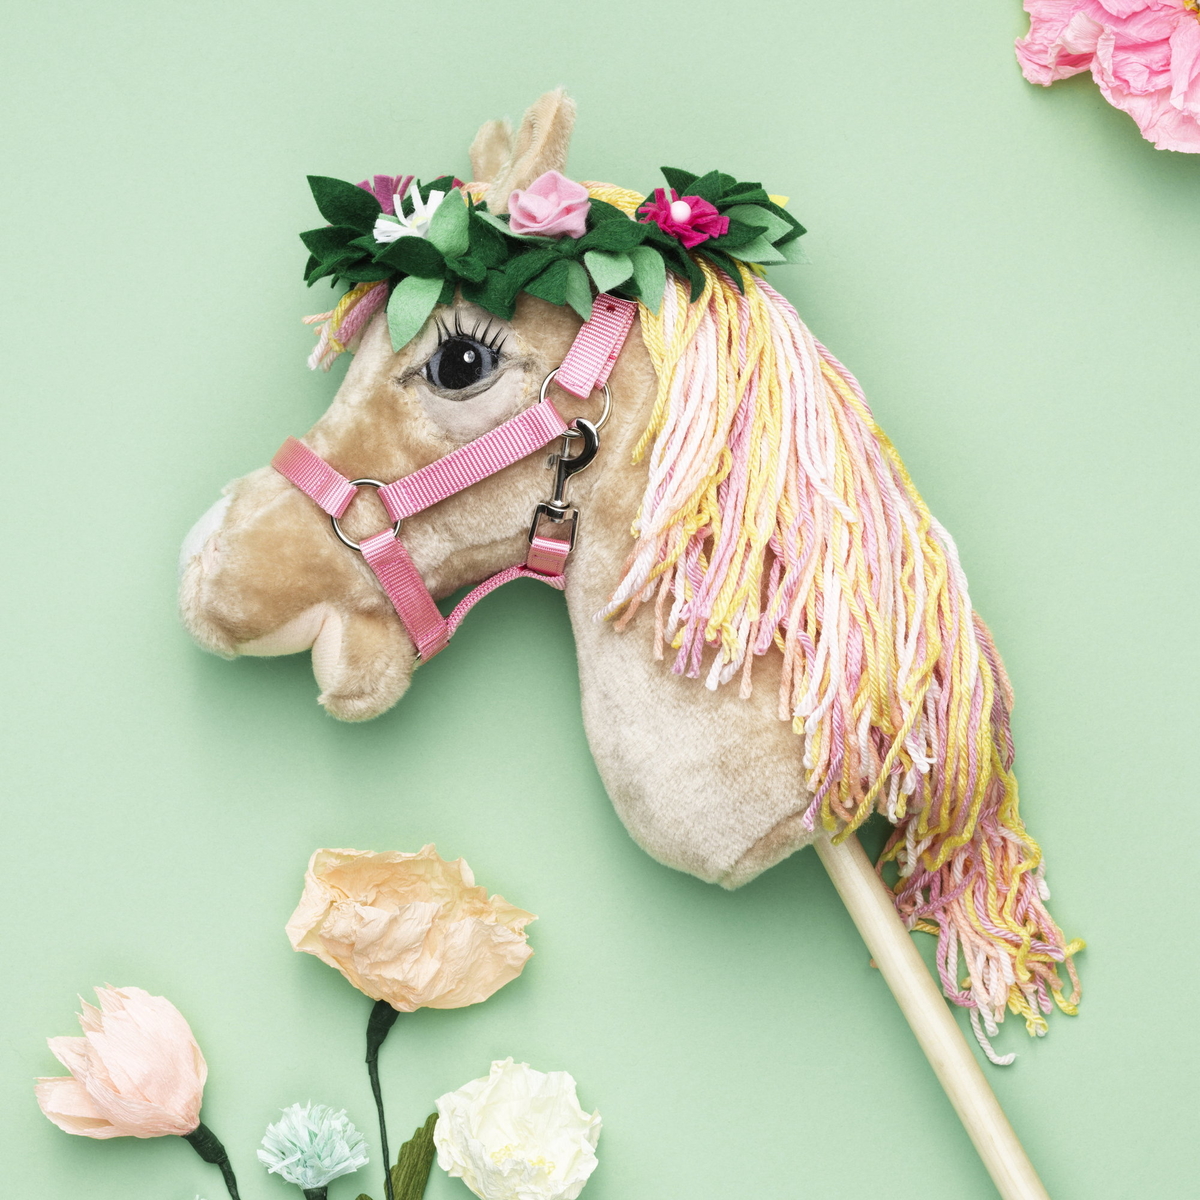 Get your hobby horse ready for summer